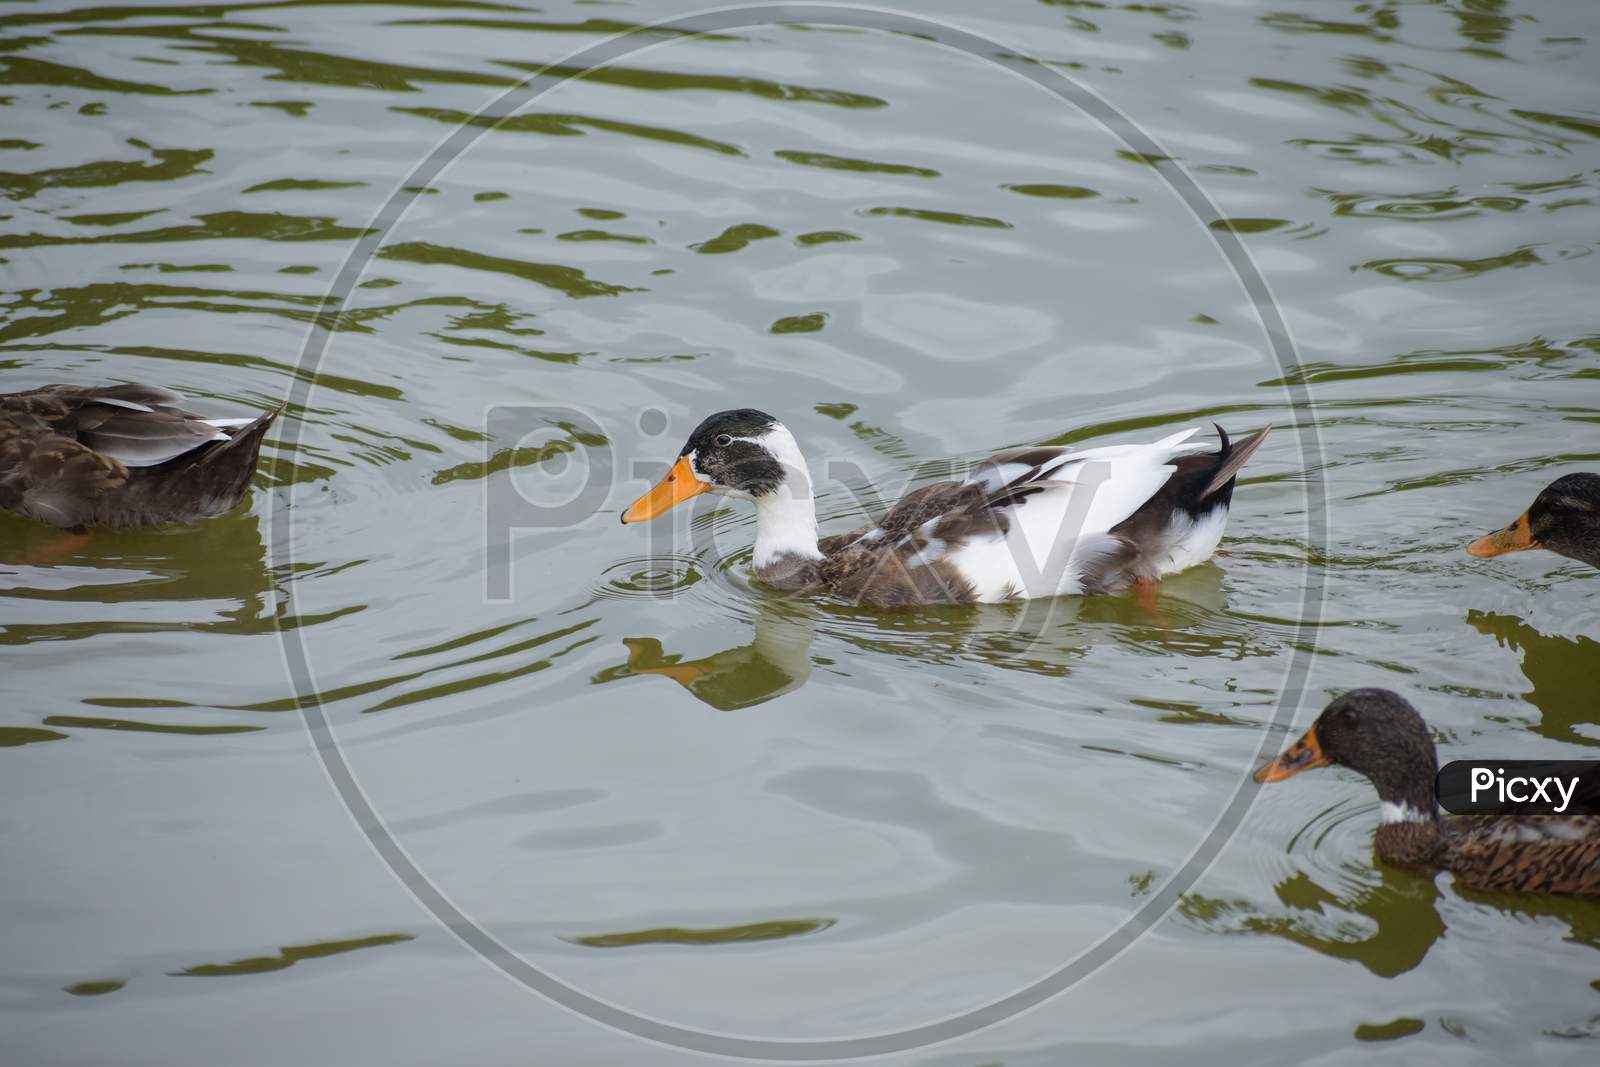 Picture Of Duck Is The Common Name For A Large Number Of Species In The Waterfowl Family Anatidae Which Also Includes Swans And Geese, Swimming In A Pond.